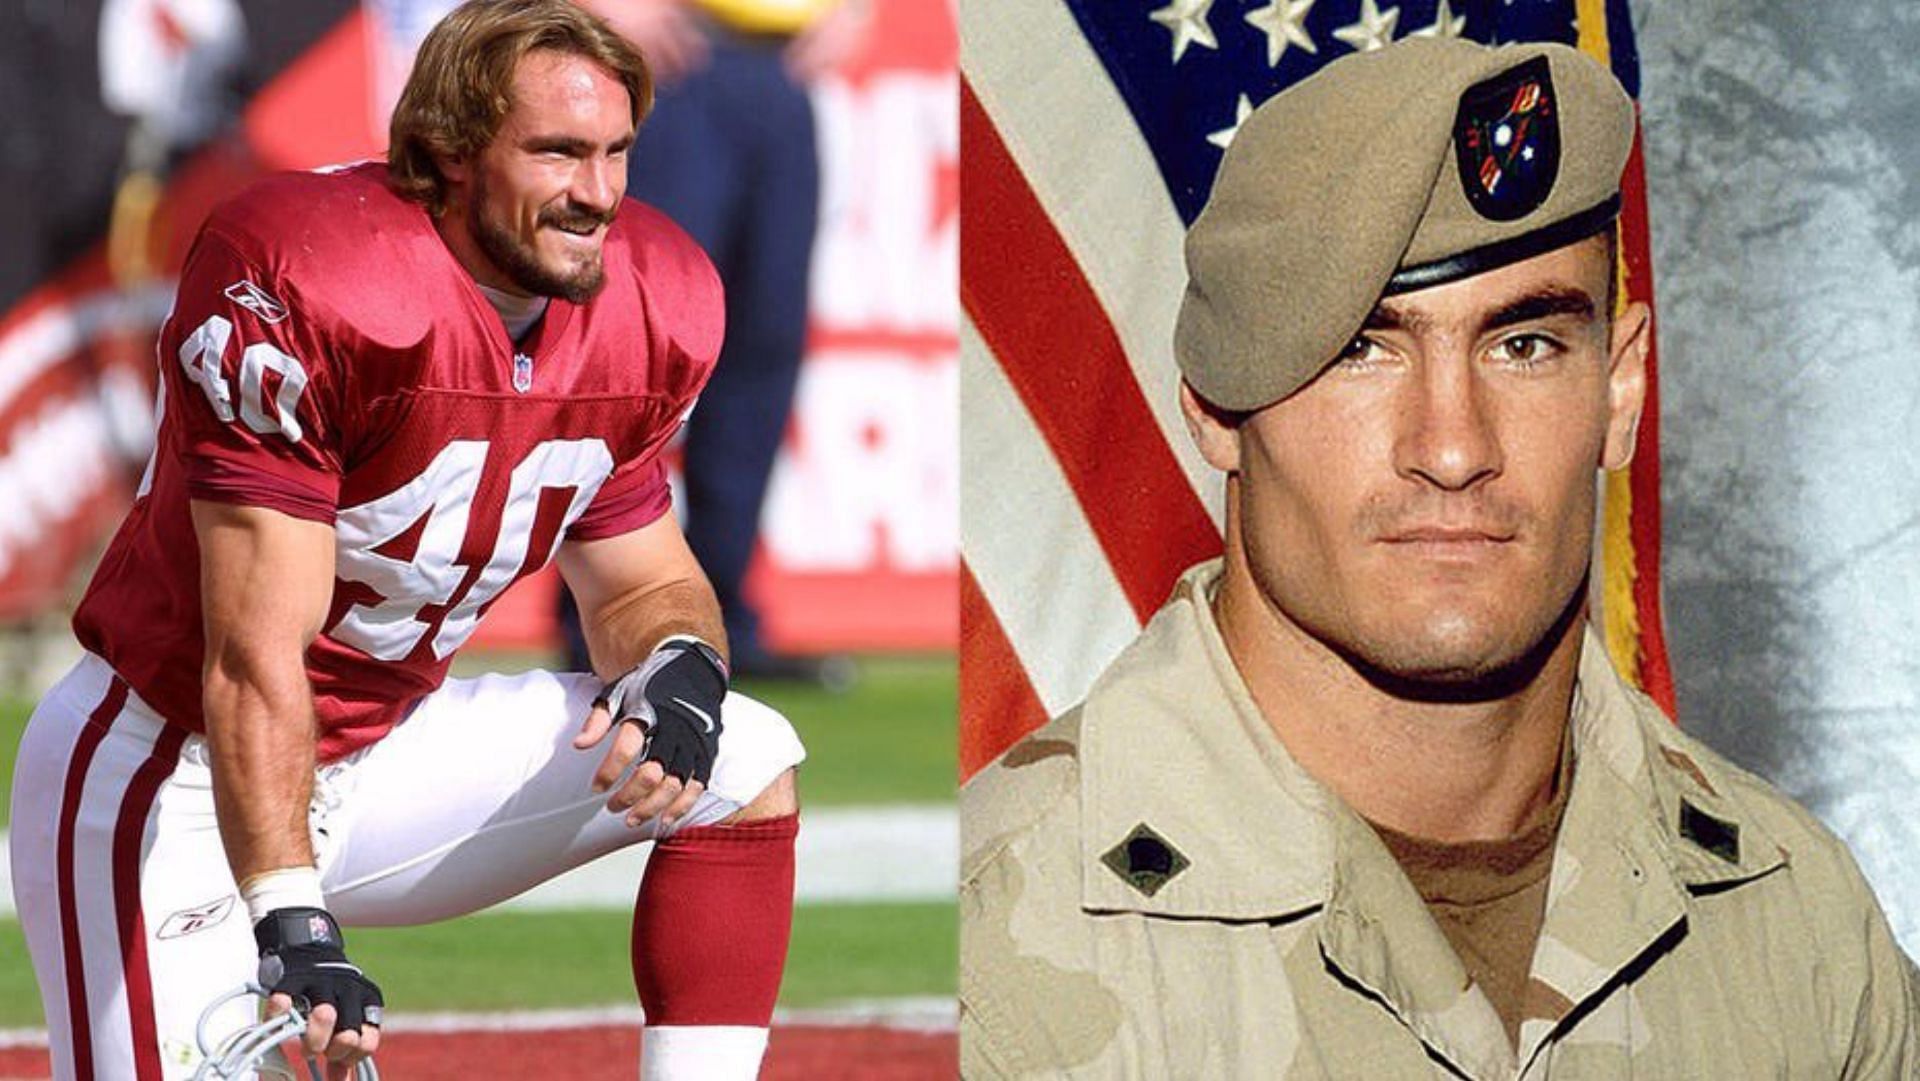 Arizona State Pays Tribute To Pat Tillman With Special